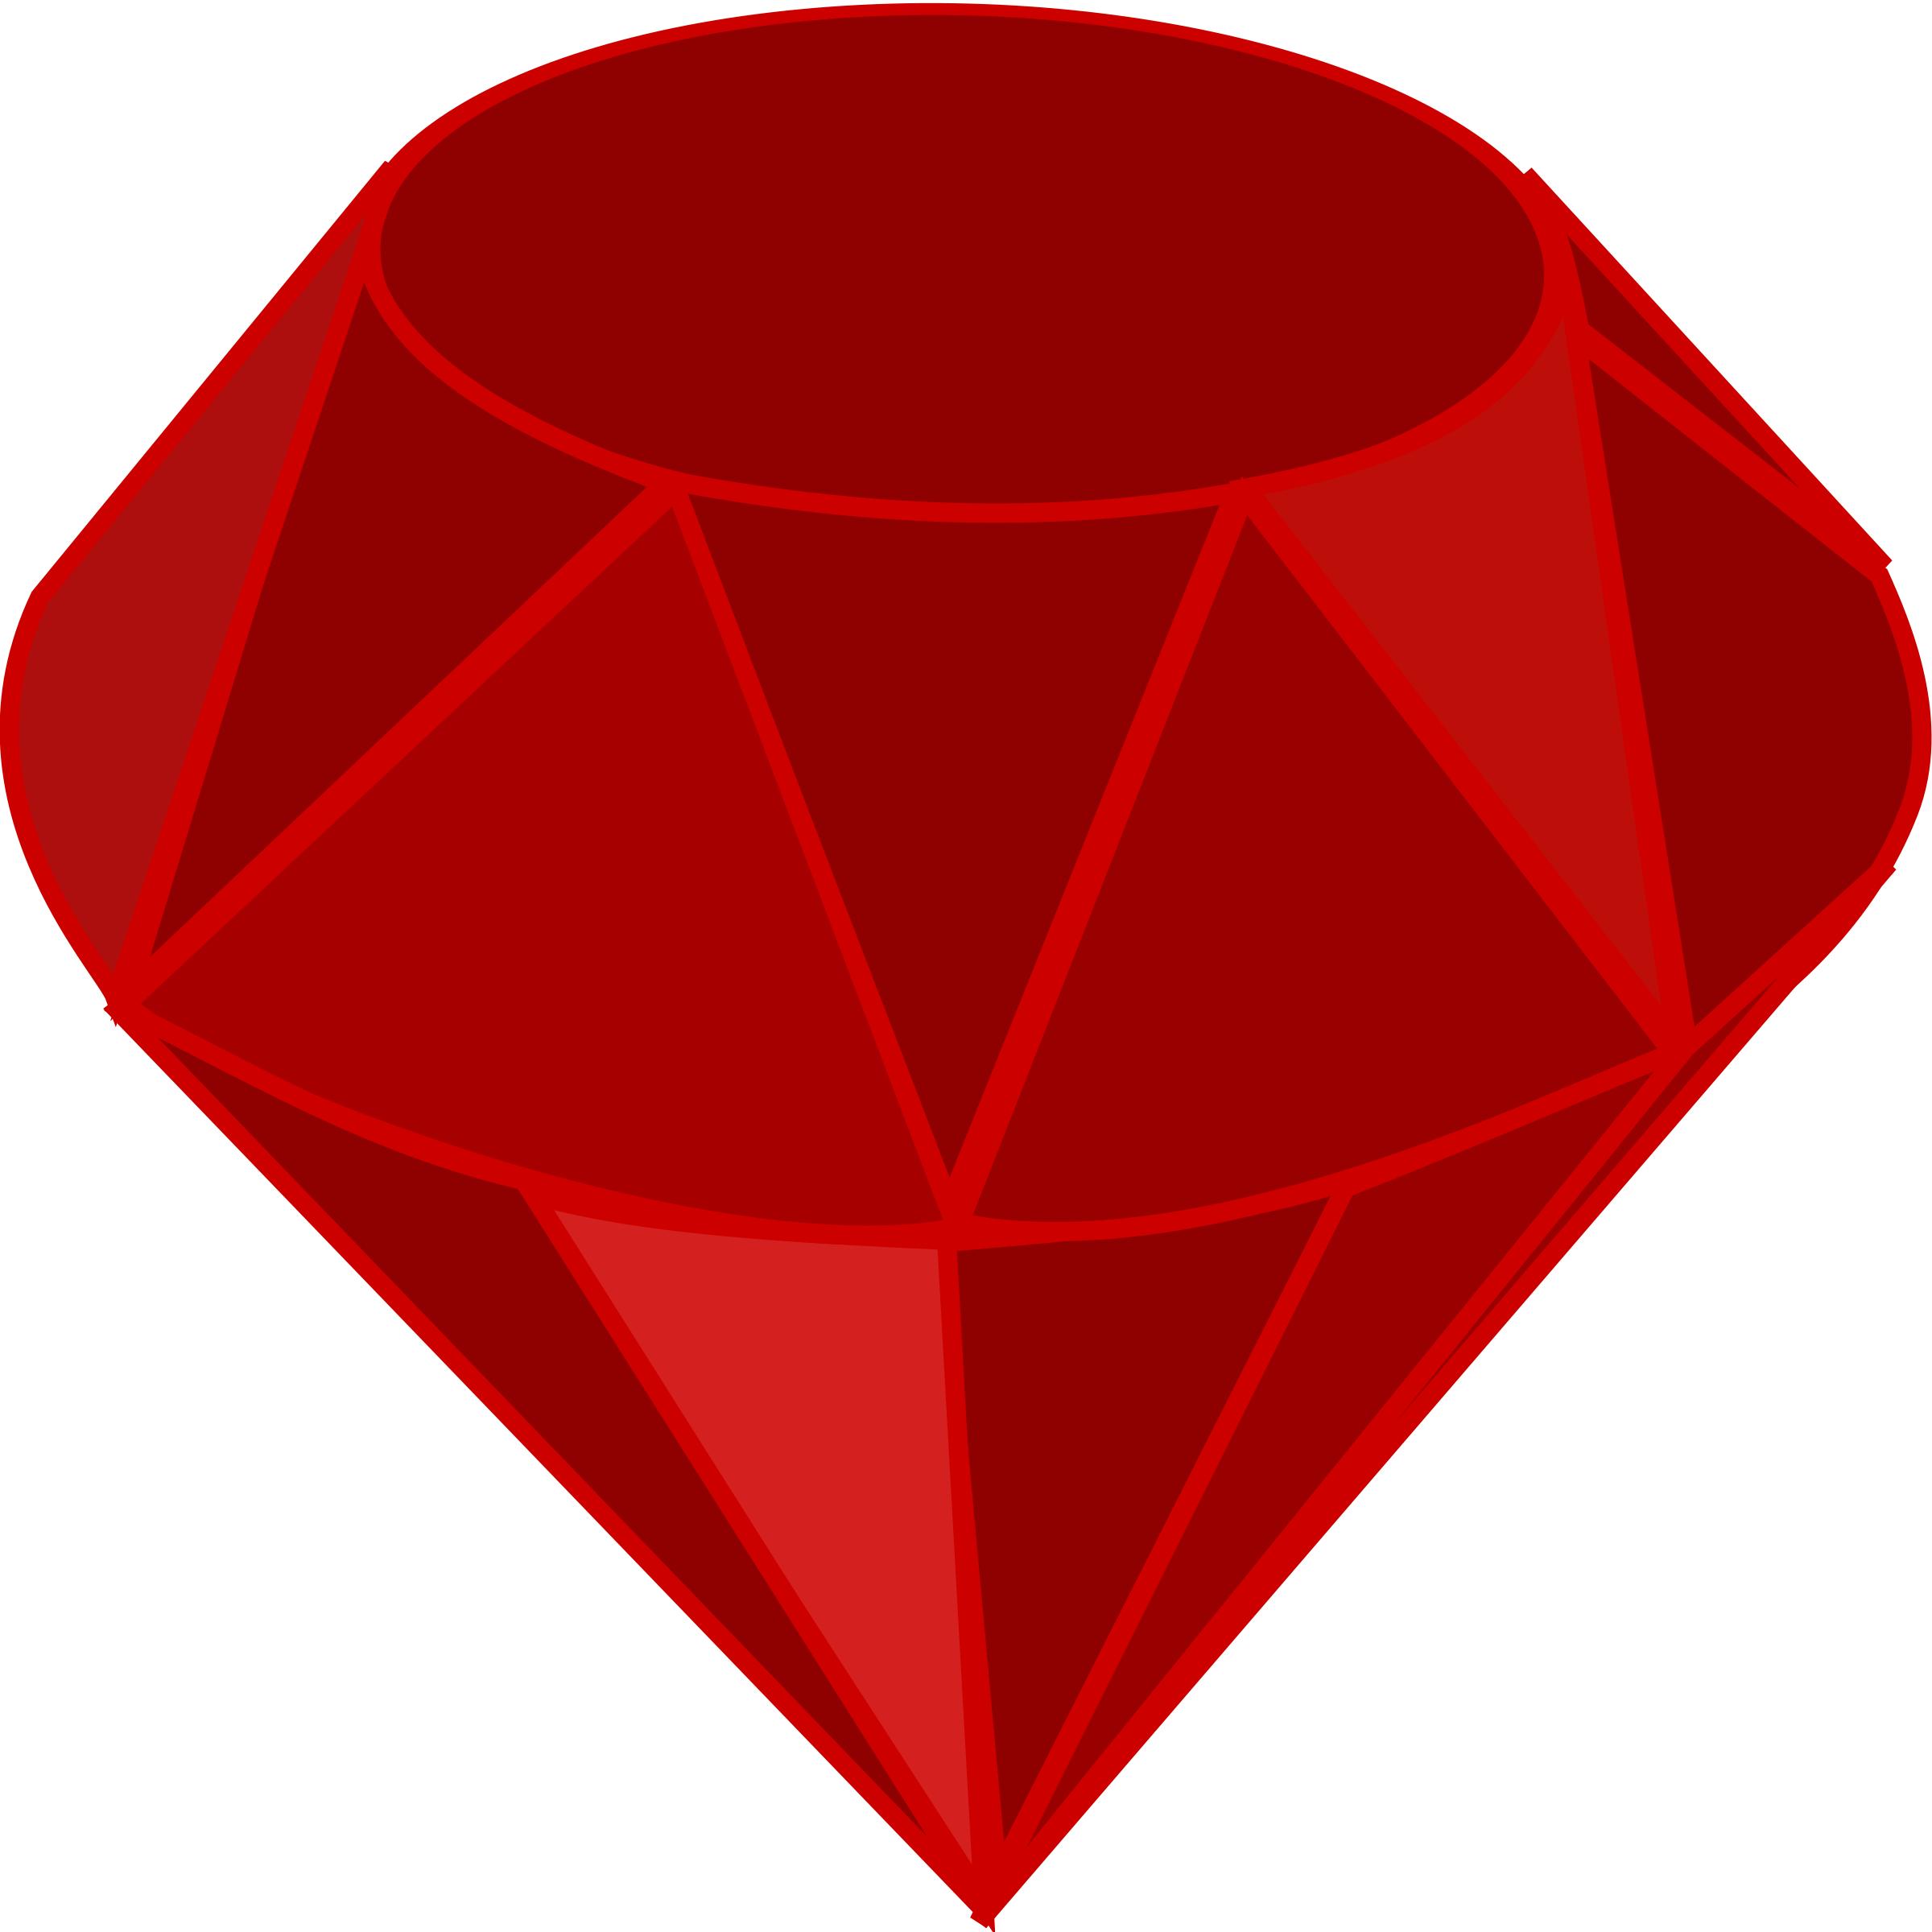 Red ruby, no transparency, no shading, square area png